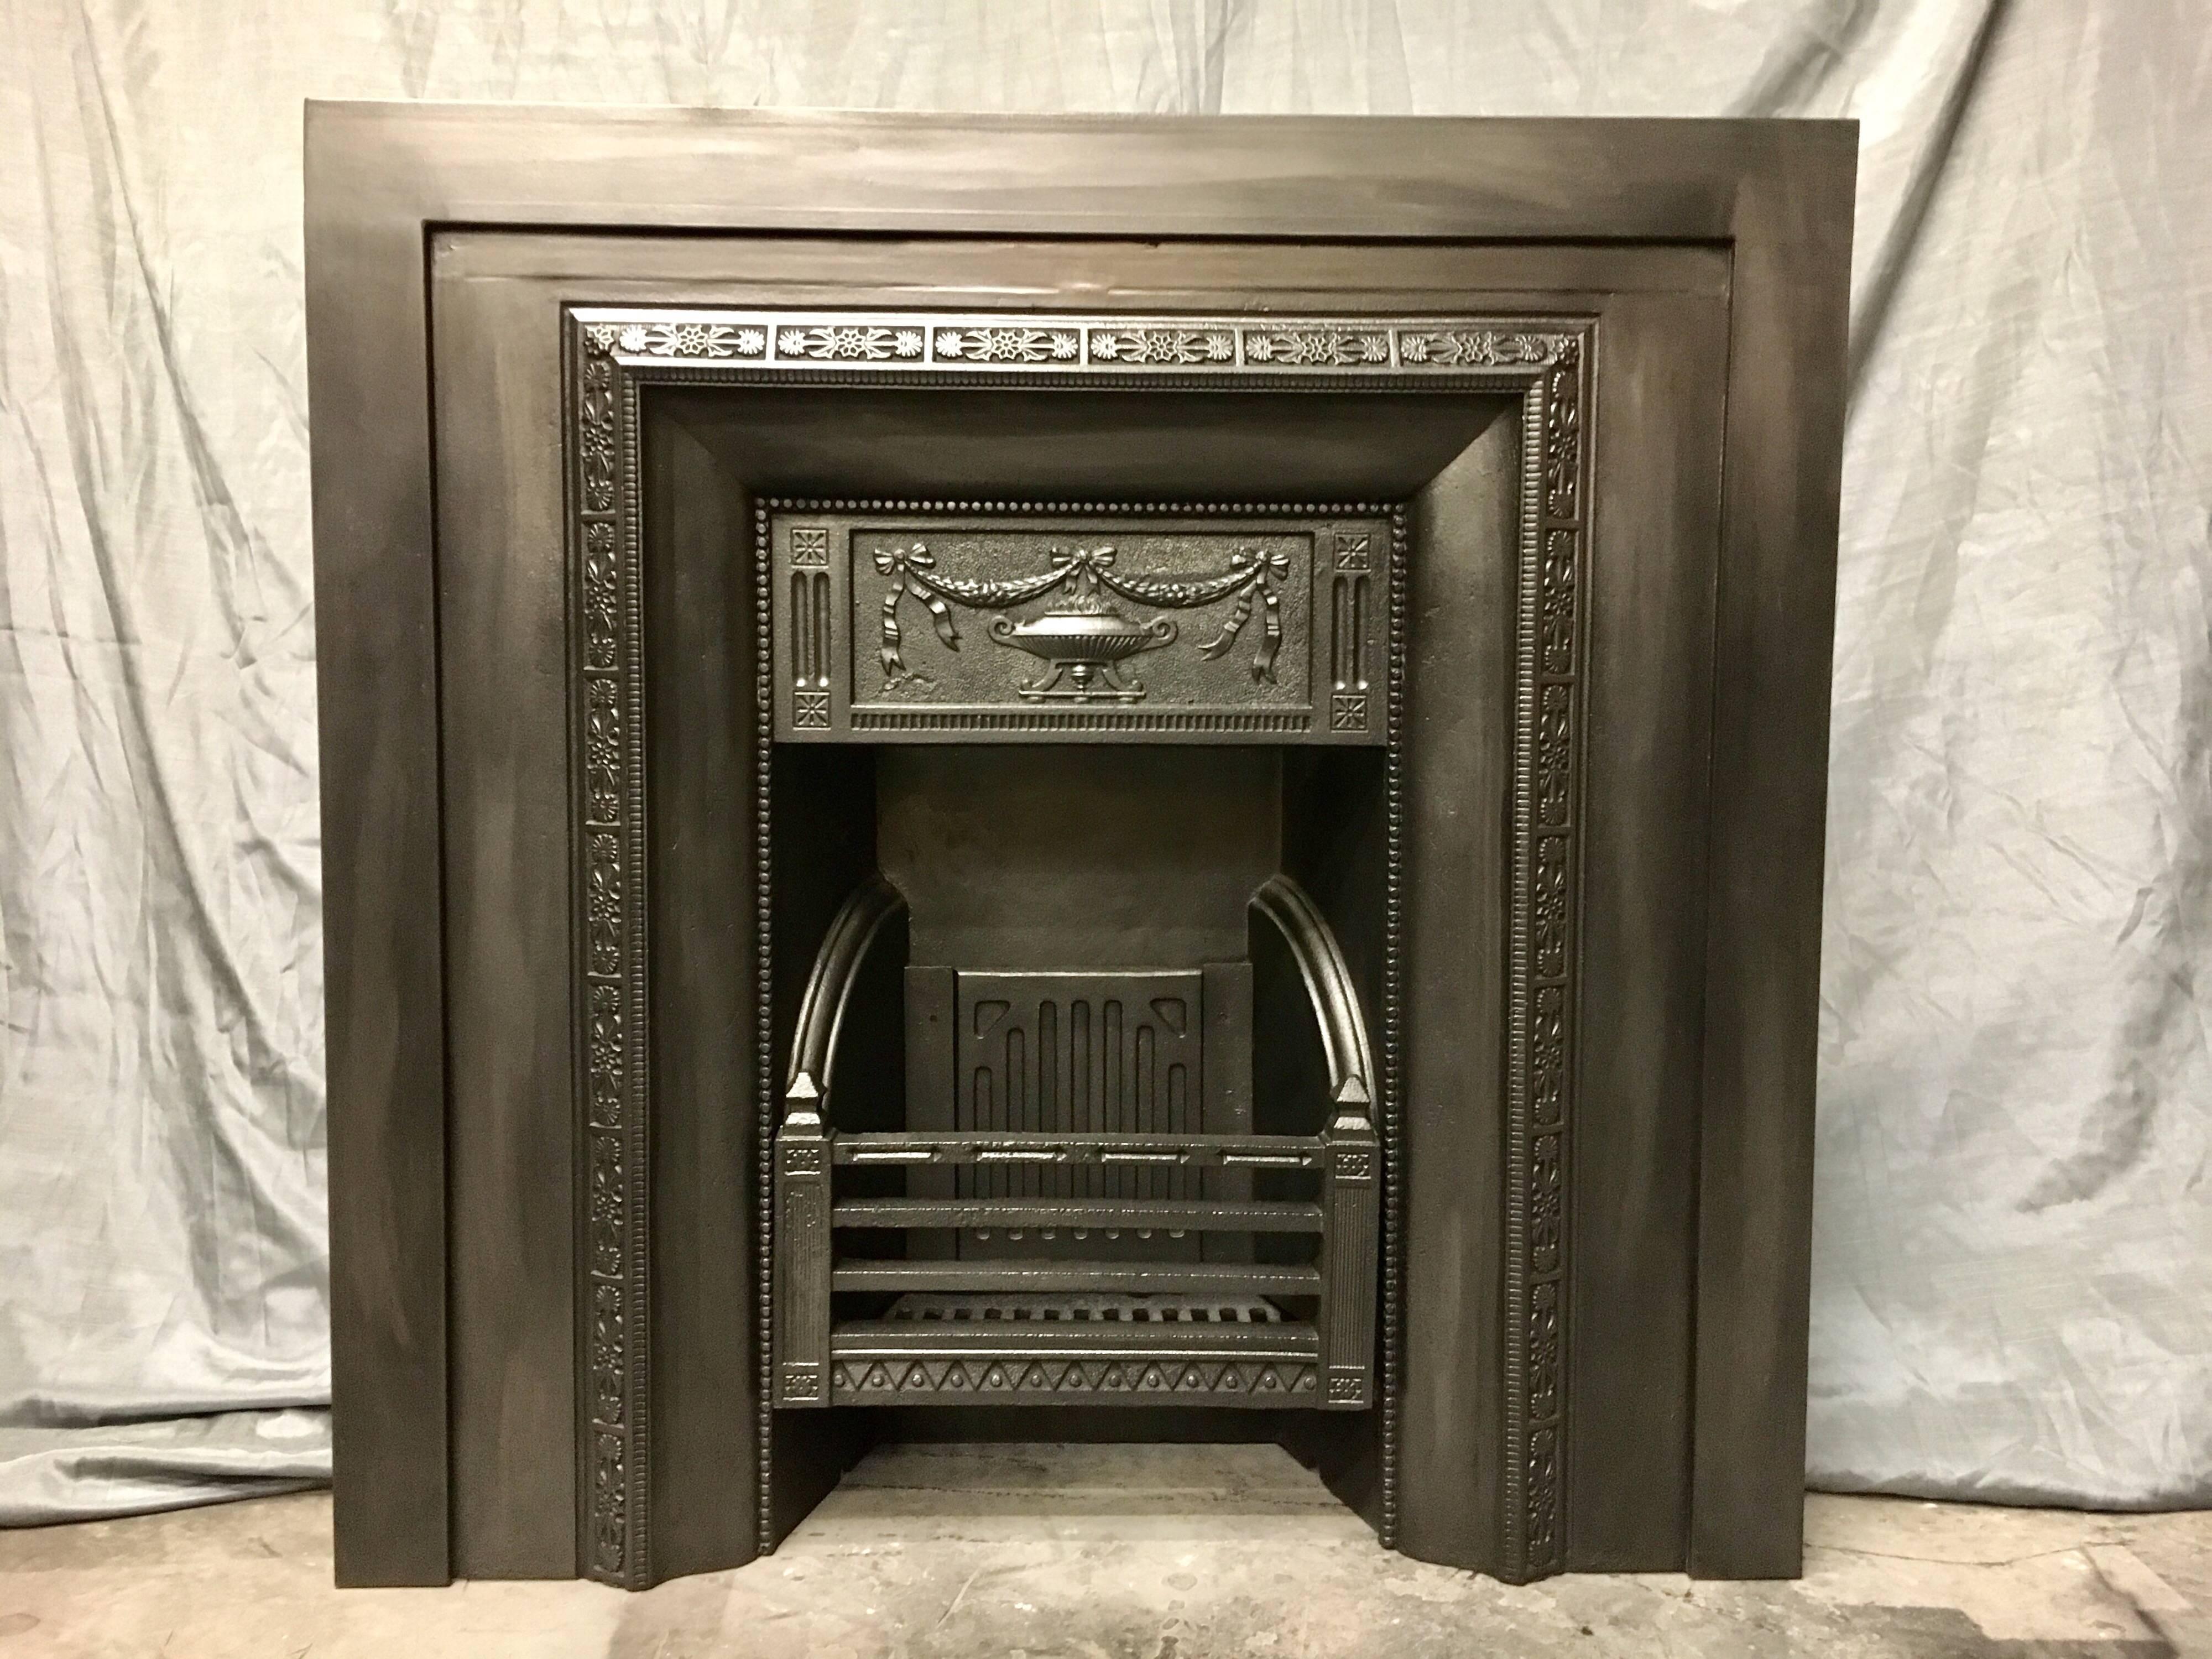 A matching pair of mid-19th century cast iron fireplace inserts probably cast in Falkirk, West Lothian, Scotland. The pair were salvaged from Preston Hall House, Midlothian, Scotland. An important Stately home first constructed around 1700c, further